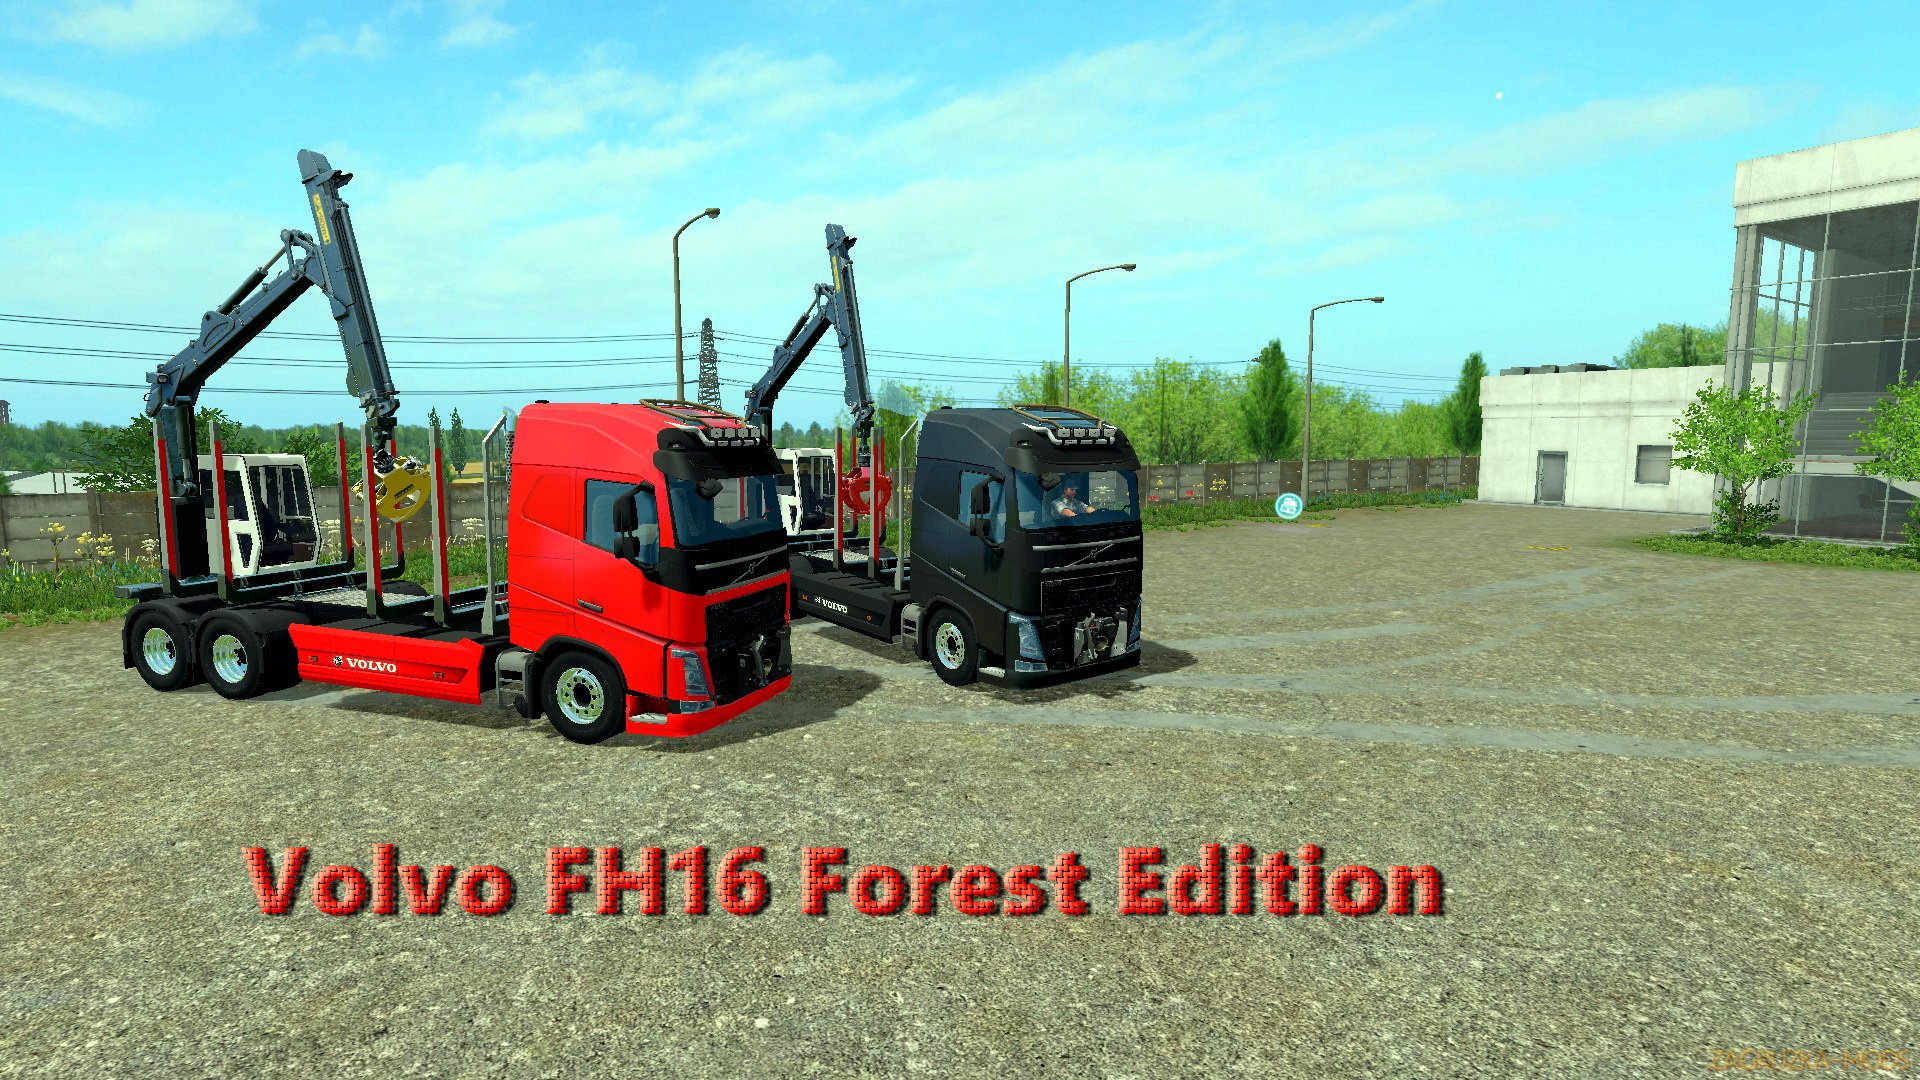 Volvo FH16 Forest Edition v1.0 for FS 17